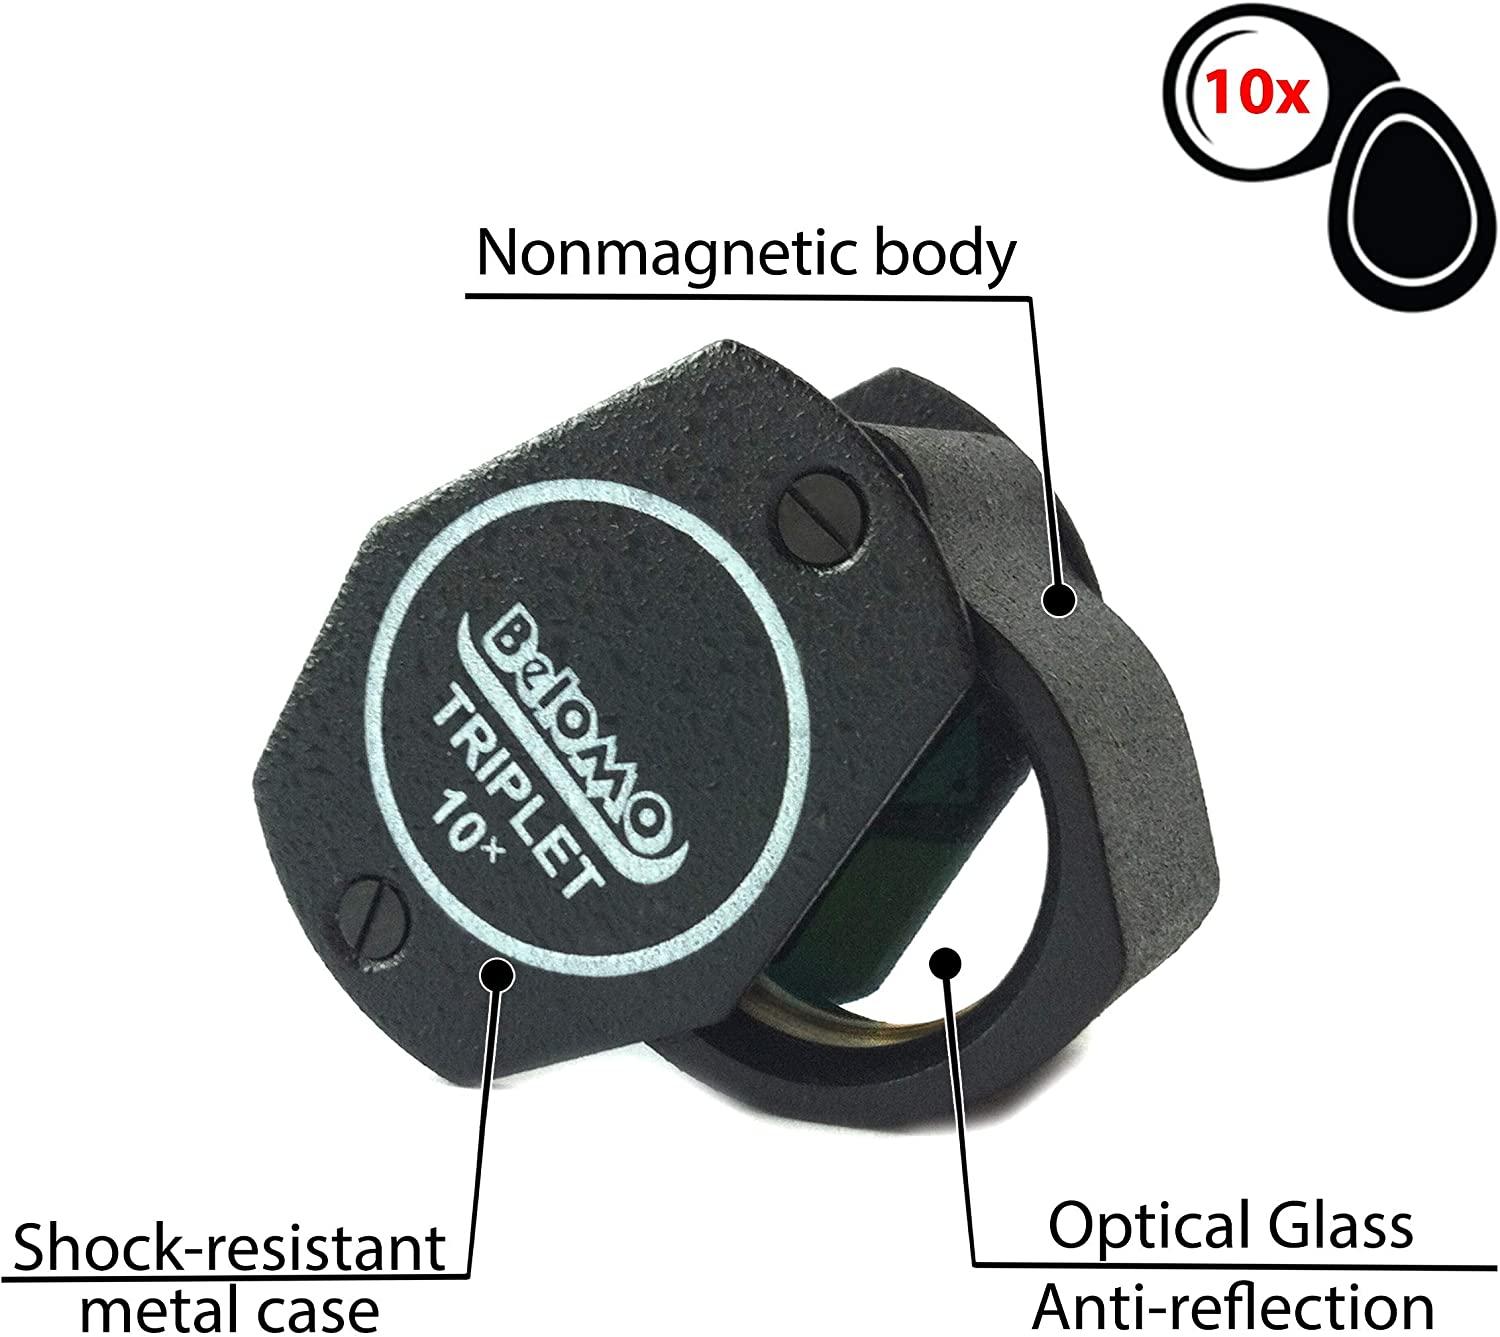 BelOMO Jewelers Loupe 10x Triplet Magnifier 21mm (.85). Optical Glass with  Anti-Reflection Coating for a Bright, Clear and Color Correct View.  Foldable Loupe for Gems, Jewelry, Coins and Trichomes